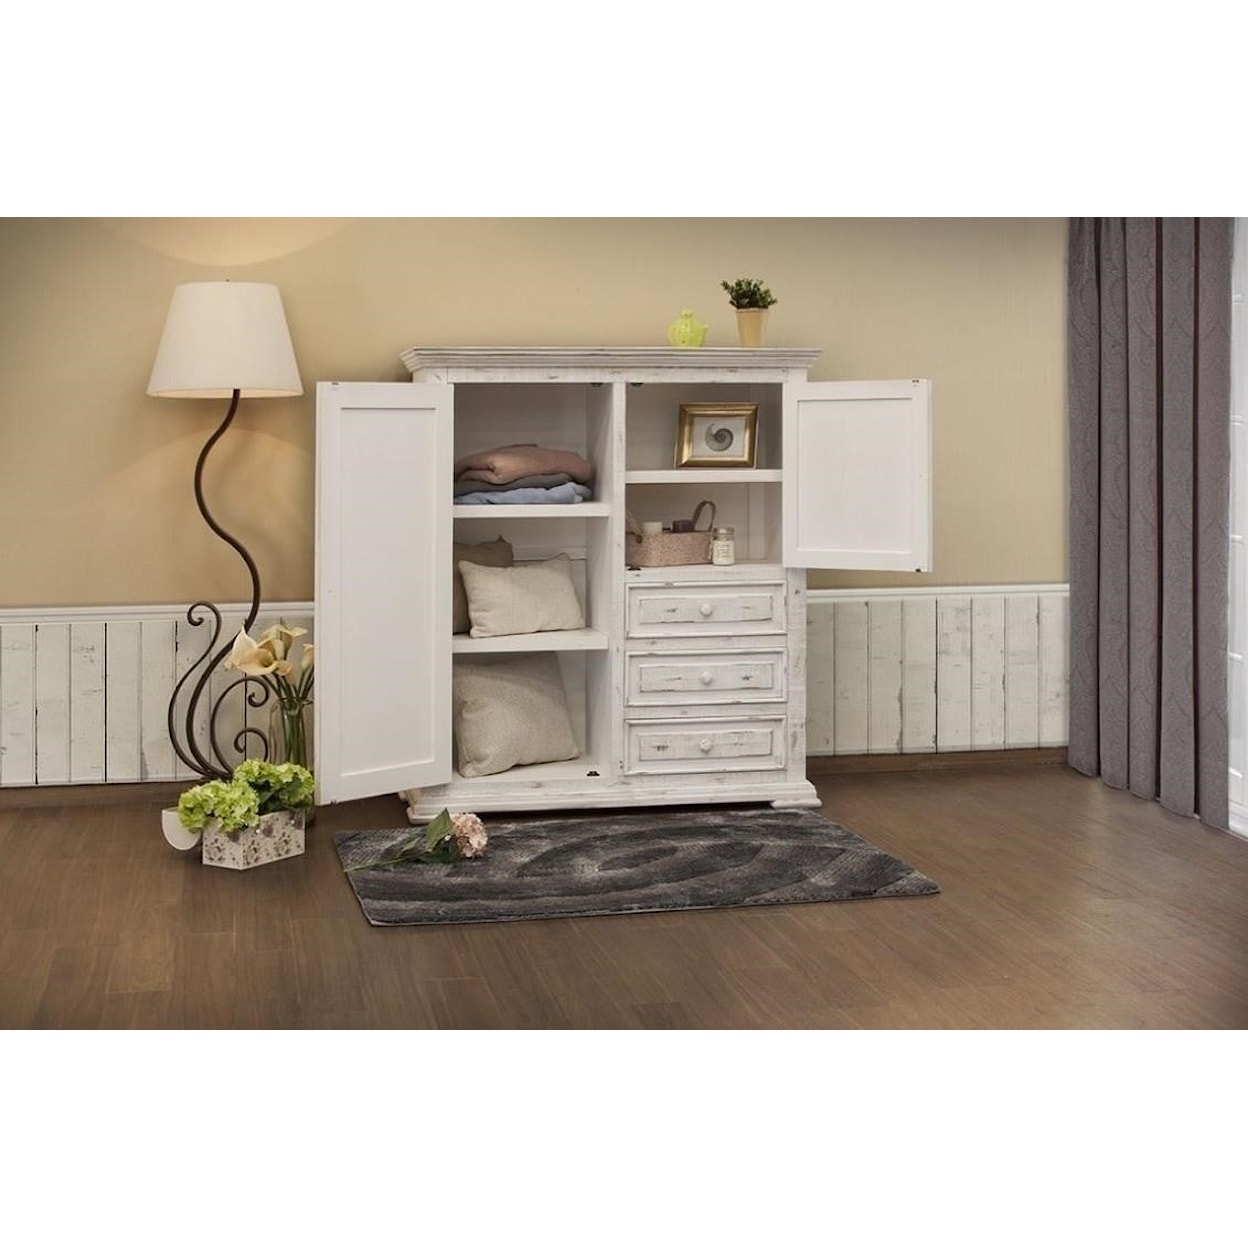 IFD International Furniture Direct Terra White Gentleman's Chest with 2 Doors and 3 Drawers